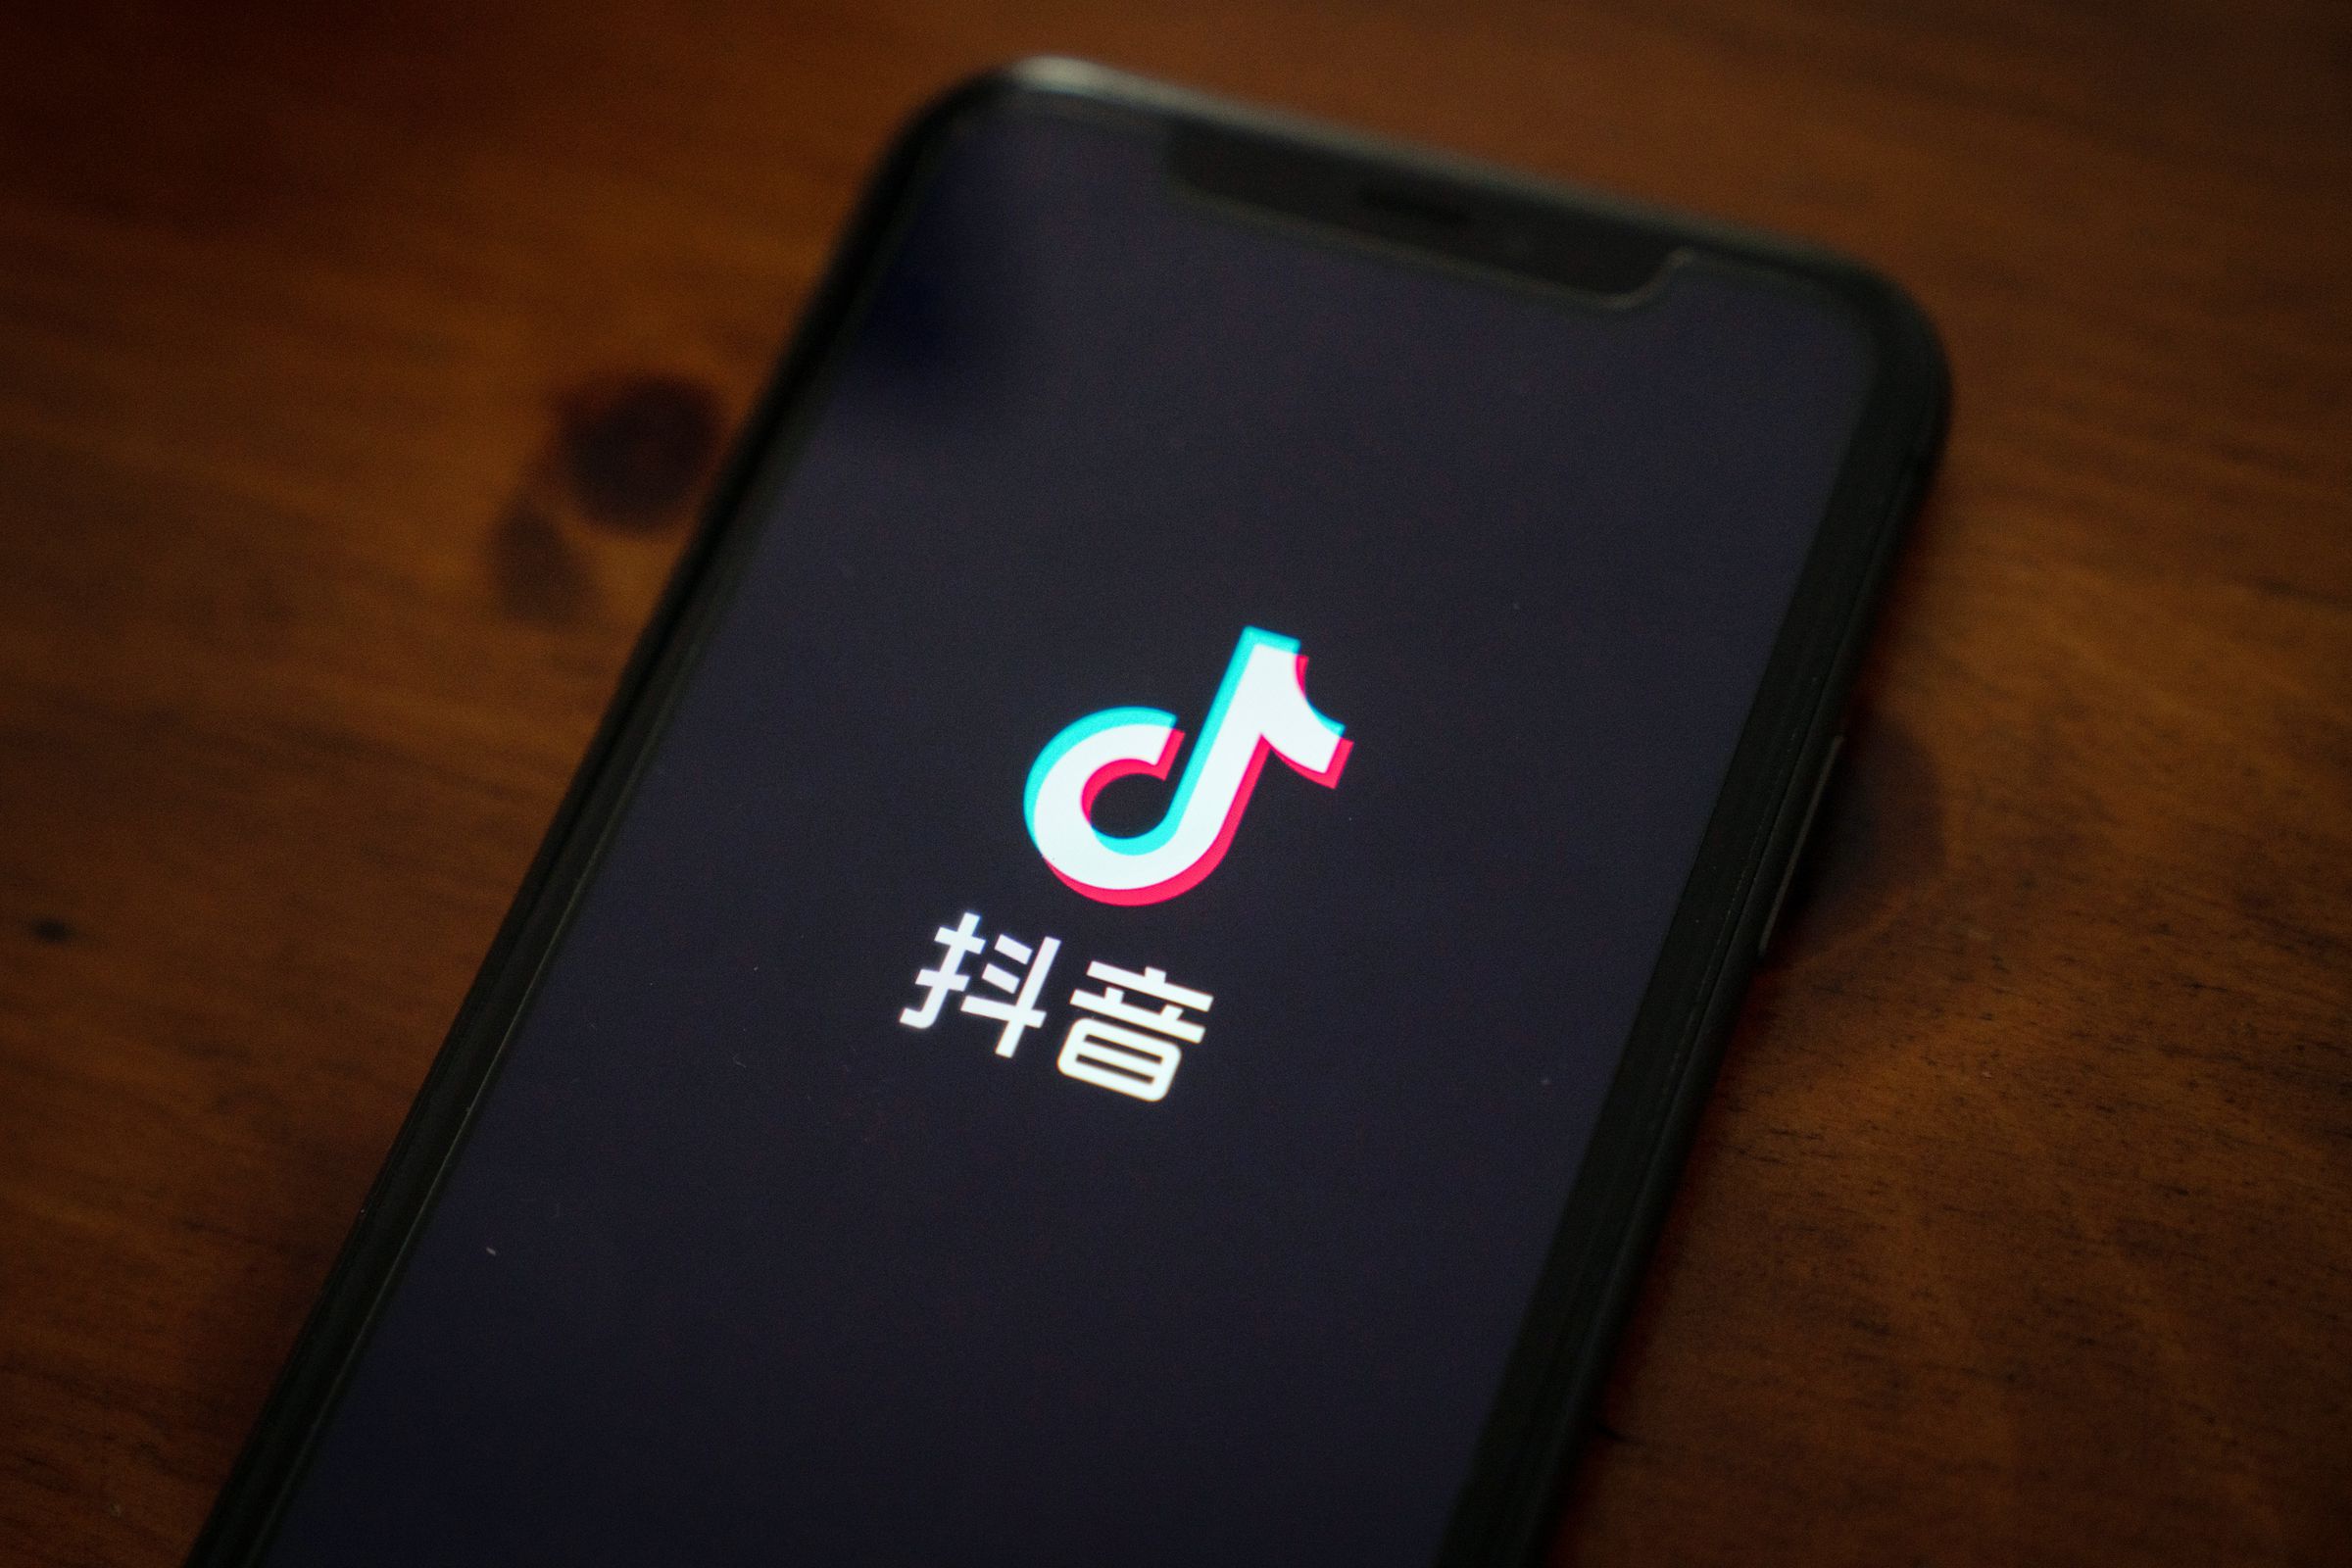 ByteDance Ltd.’s Douyin App As TikTok Owner Challenges Alibaba in E-Commerce Ahead of IPO